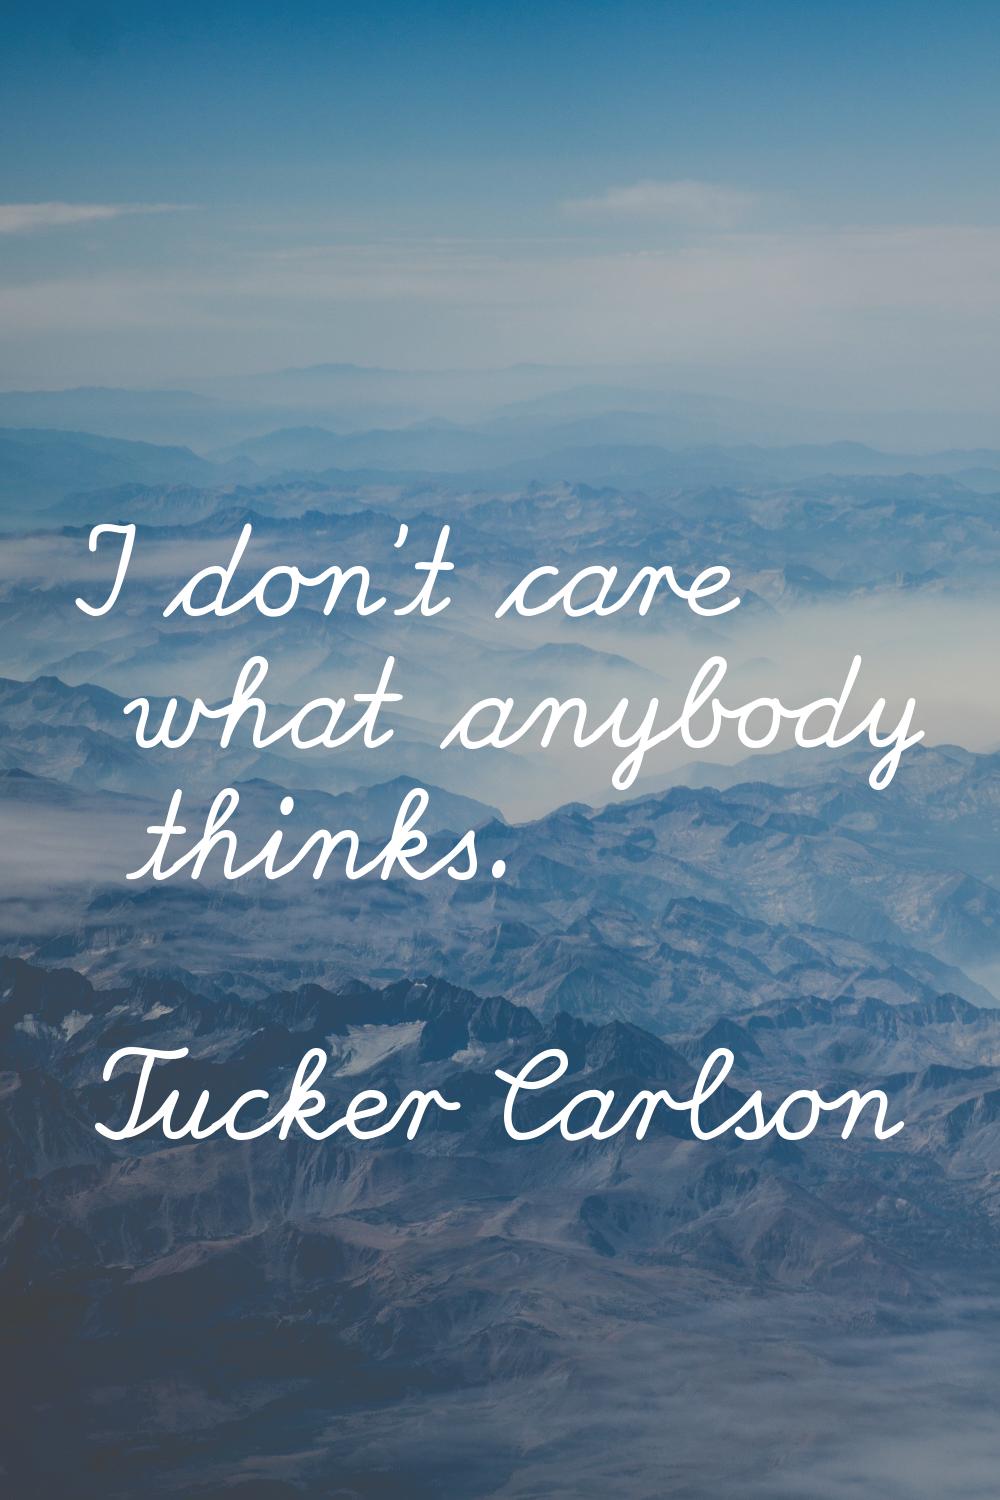 I don't care what anybody thinks.